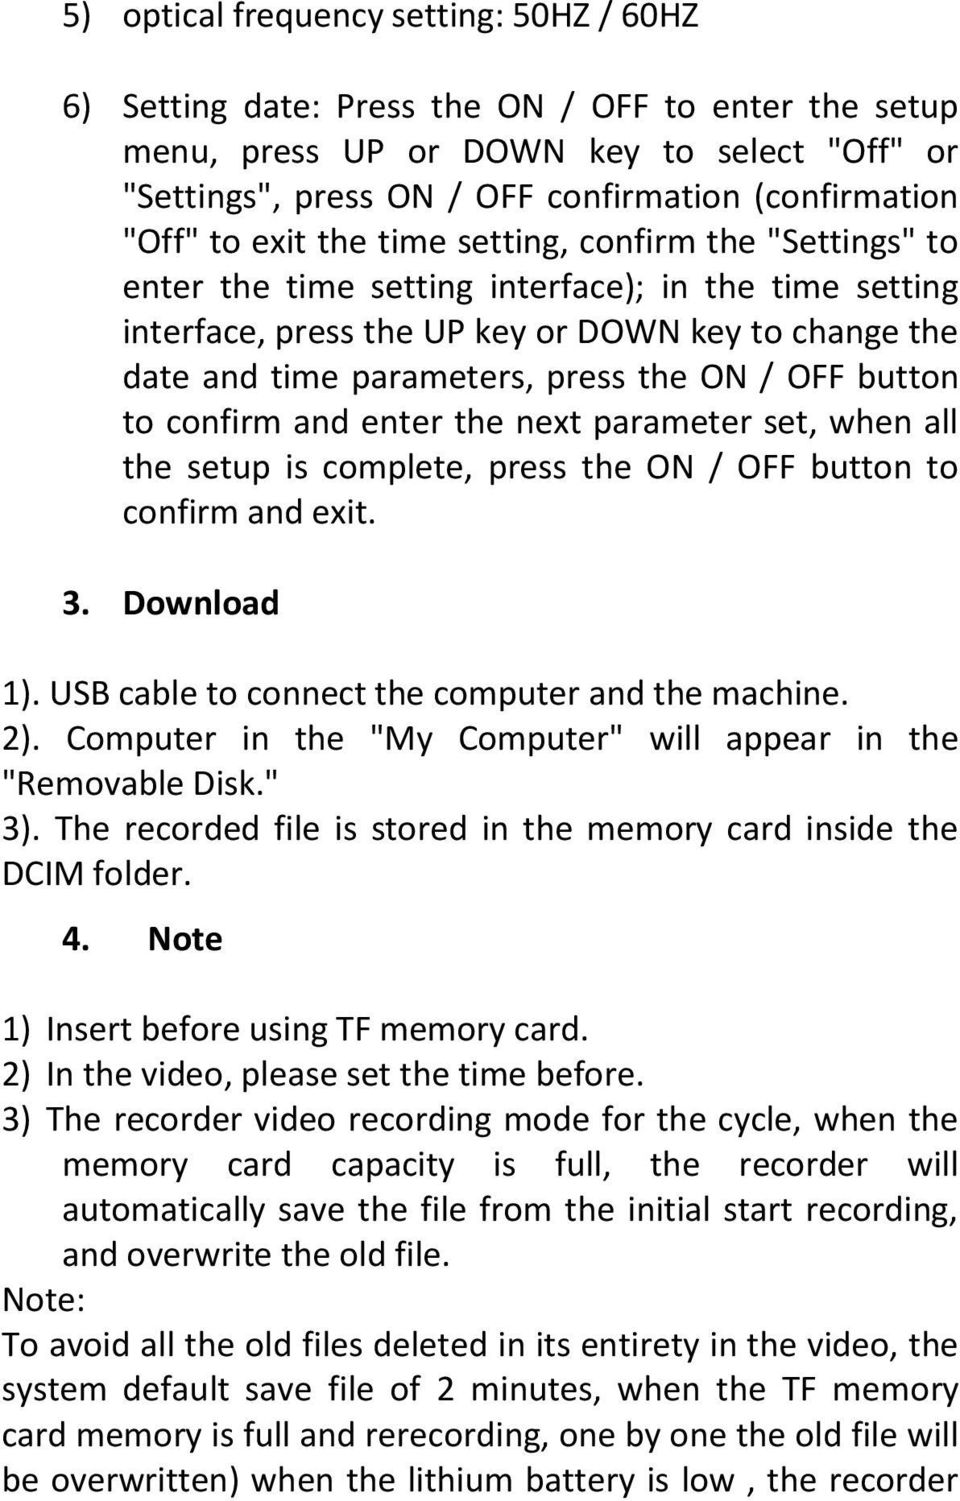 the ON / OFF button to confirm and enter the next parameter set, when all the setup is complete, press the ON / OFF button to confirm and exit. 3. Download 1).